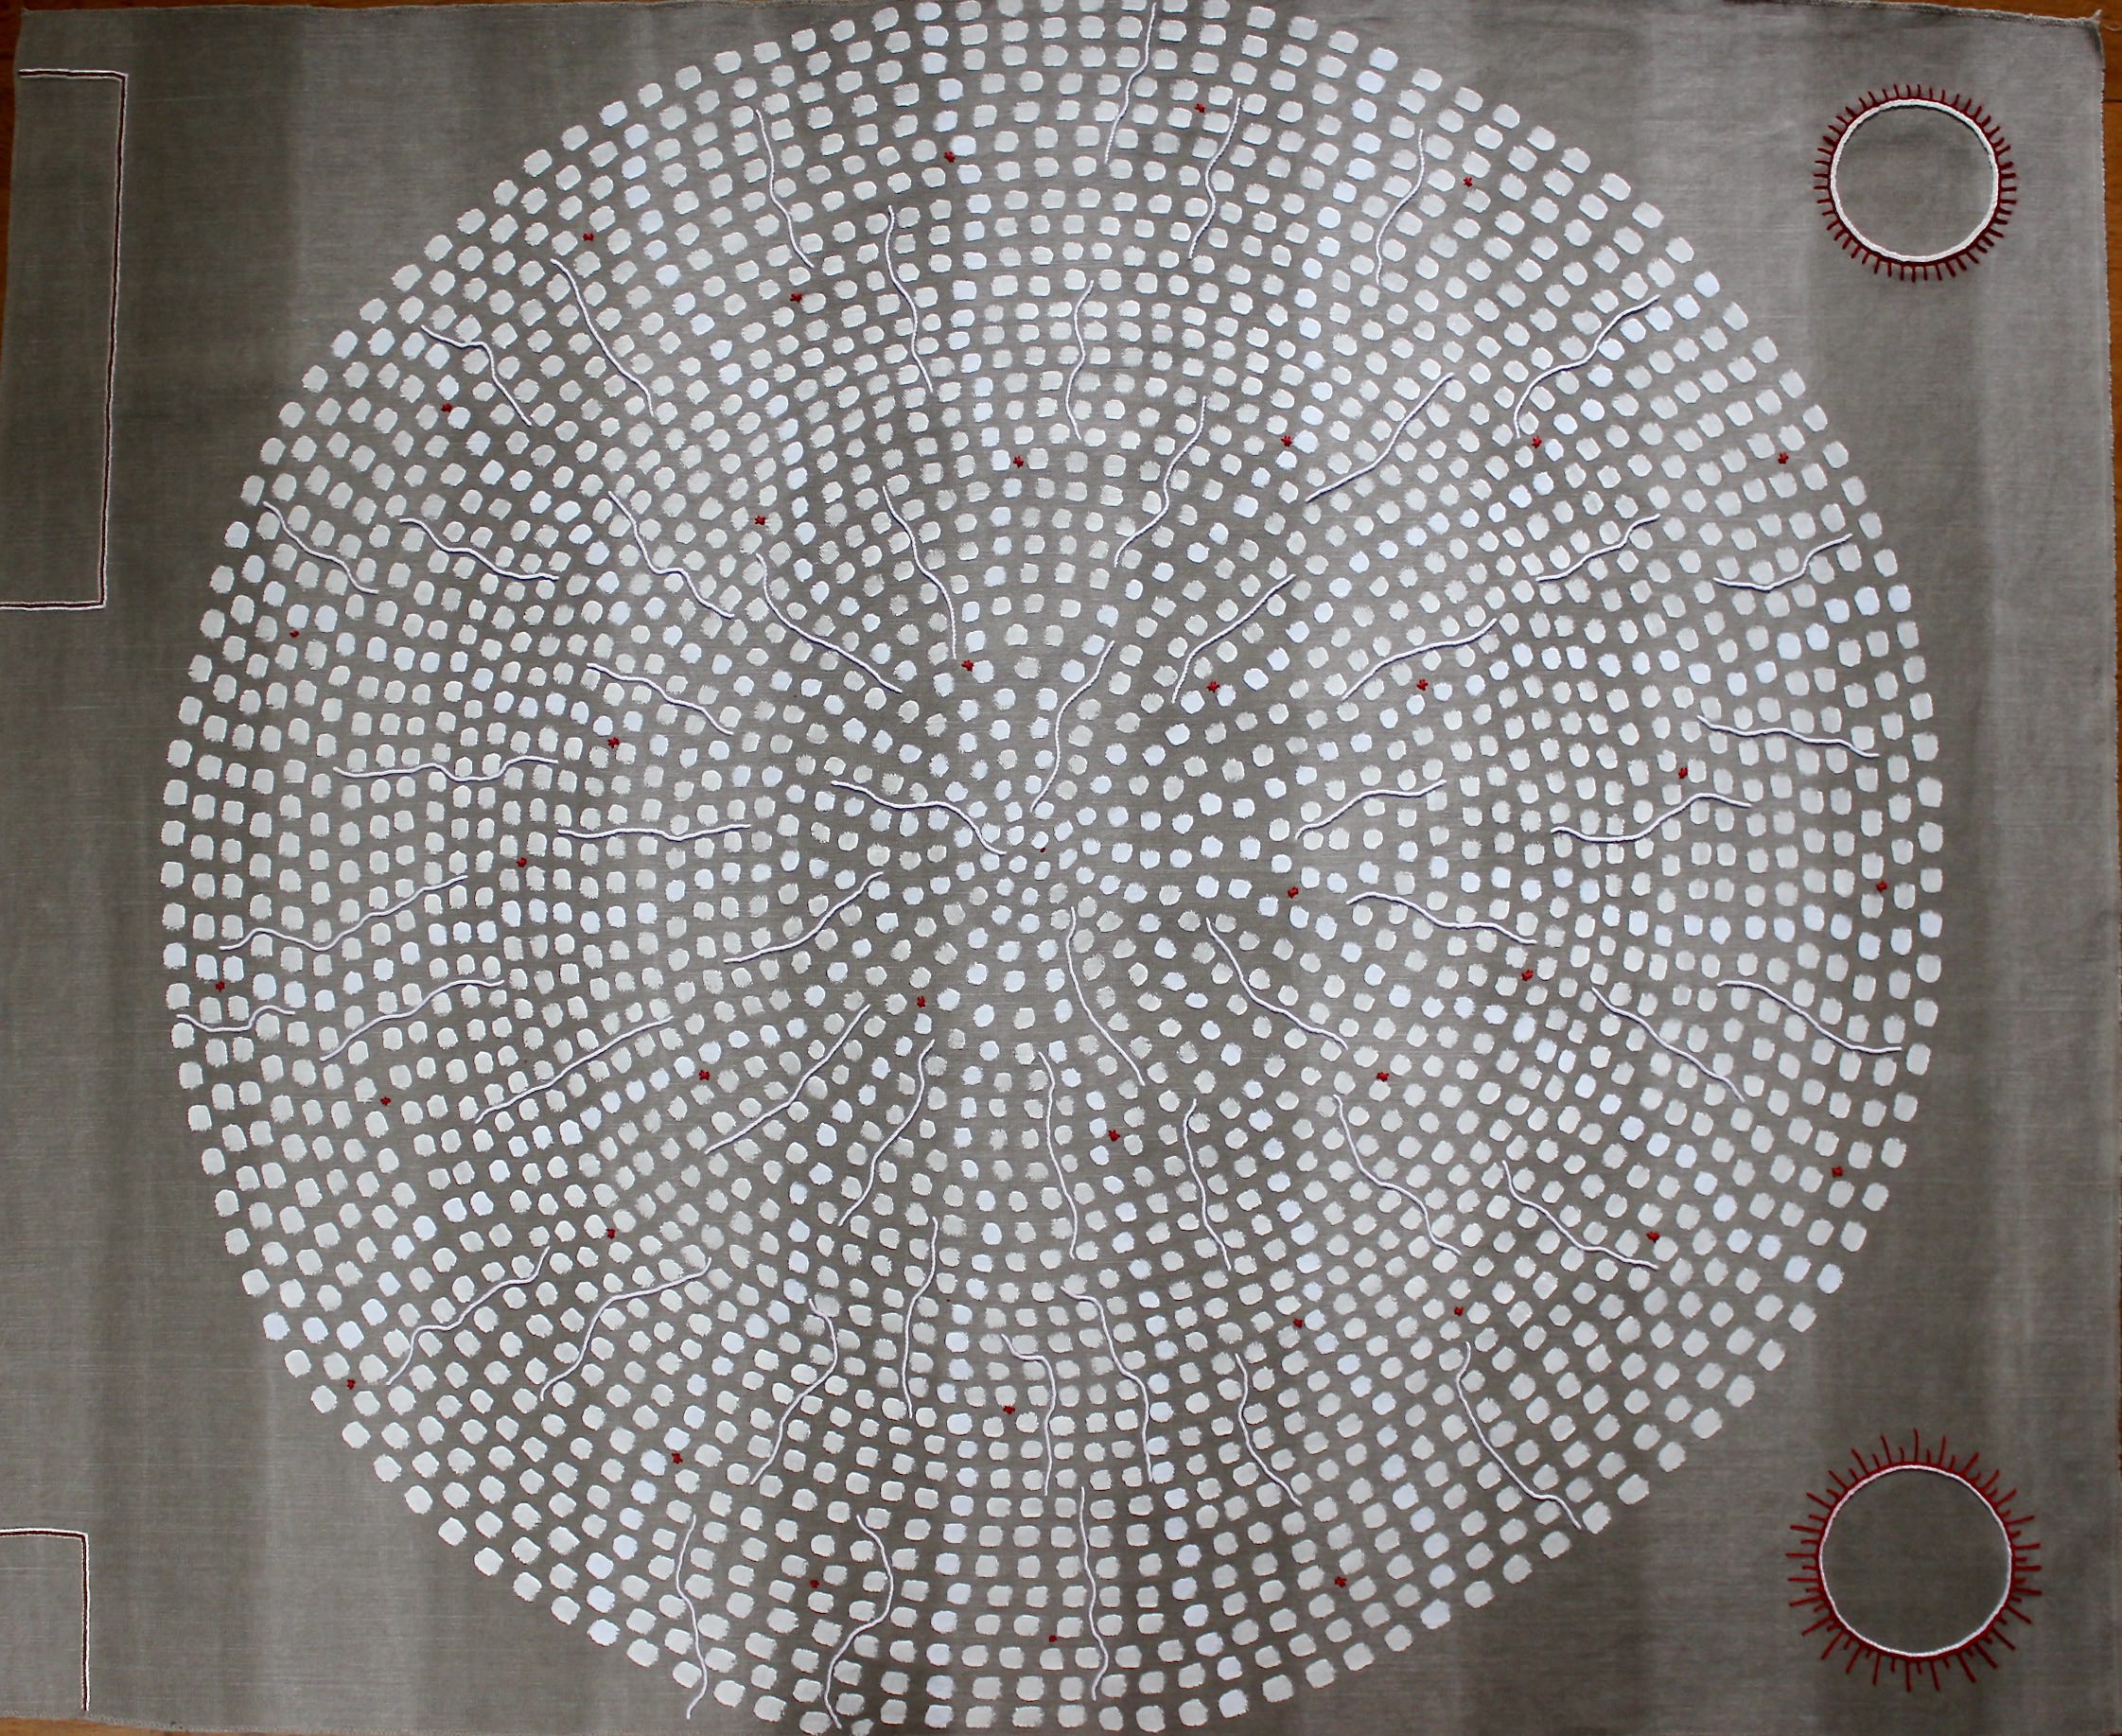 Hand embroidery, acrylic on linen/cotton 1m x 1.40m